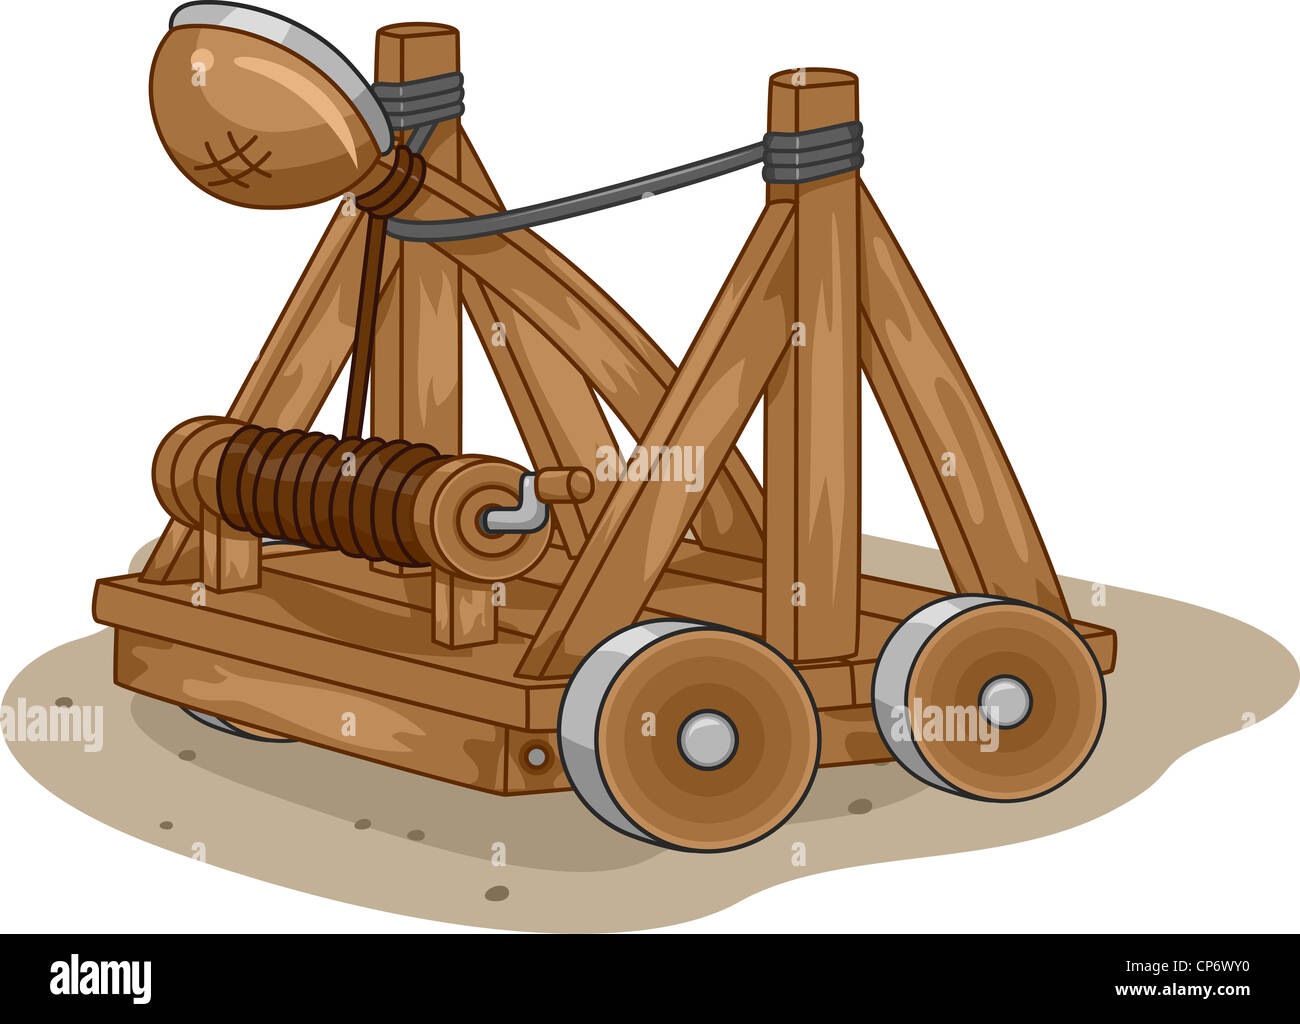 Illustration of a Catapult Stock Photo